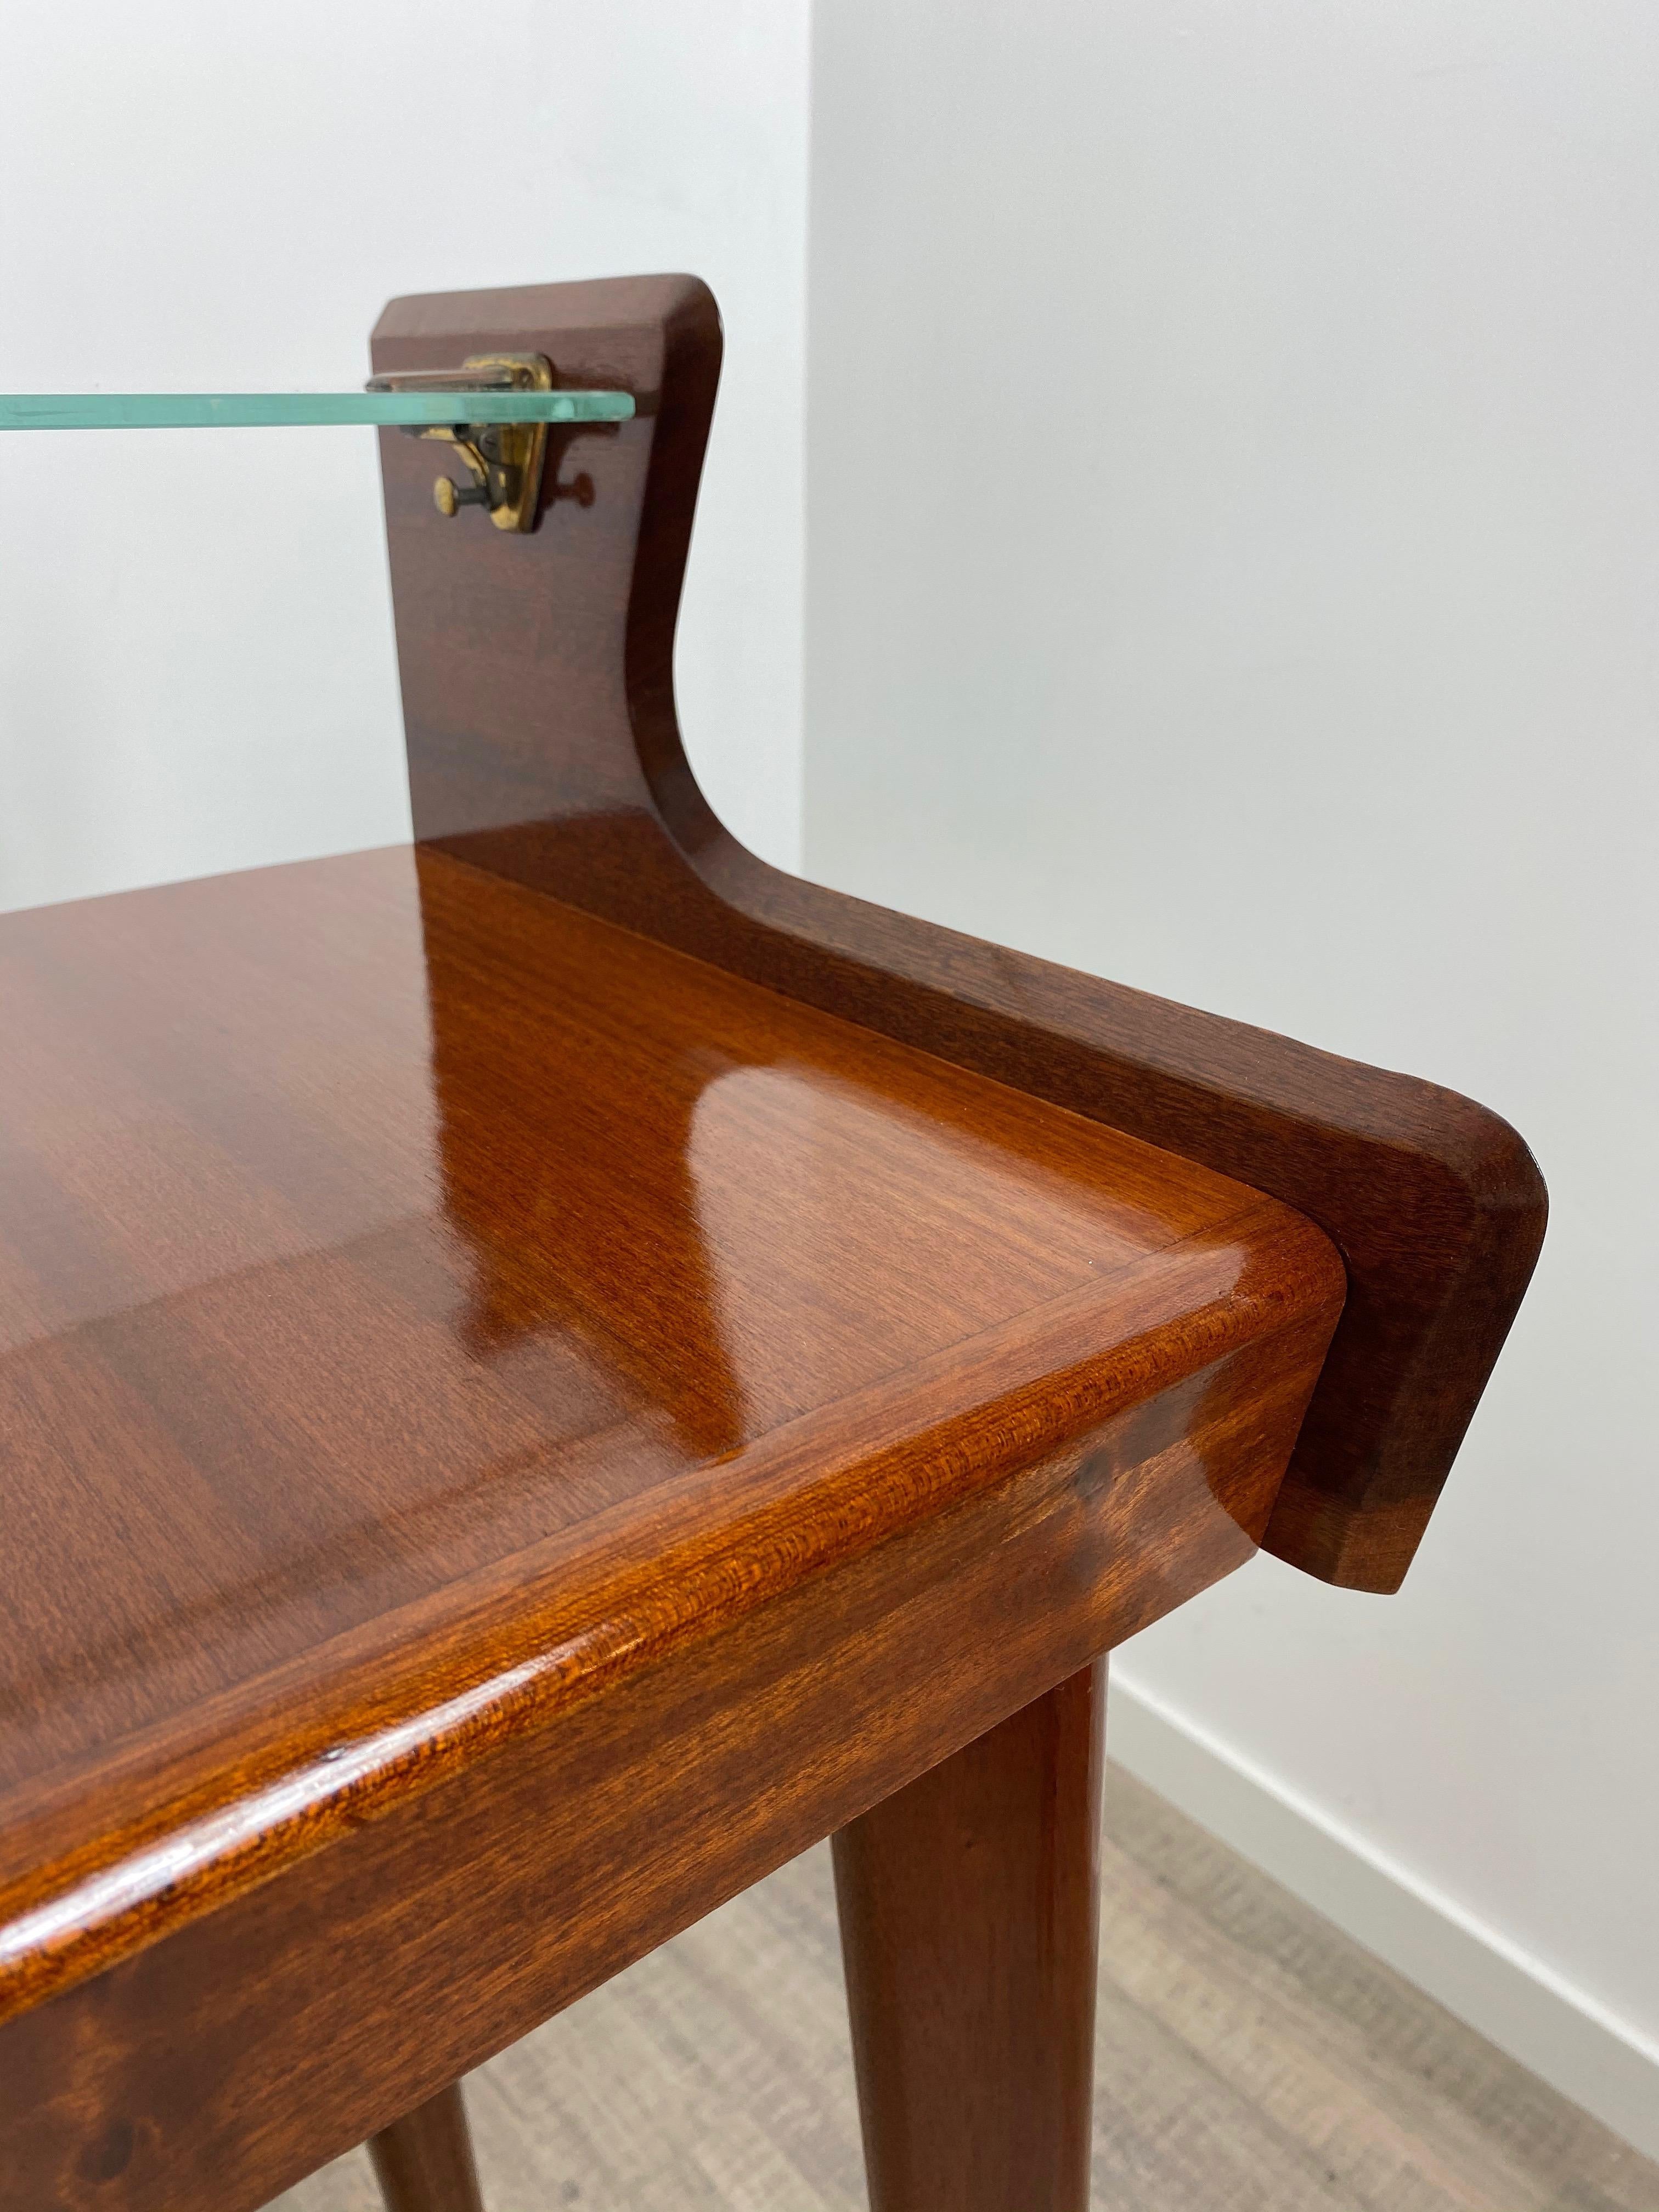 Italian Midcentury Mahogany Wood and Glass Console Table by Carlo de Carli 1950s For Sale 10